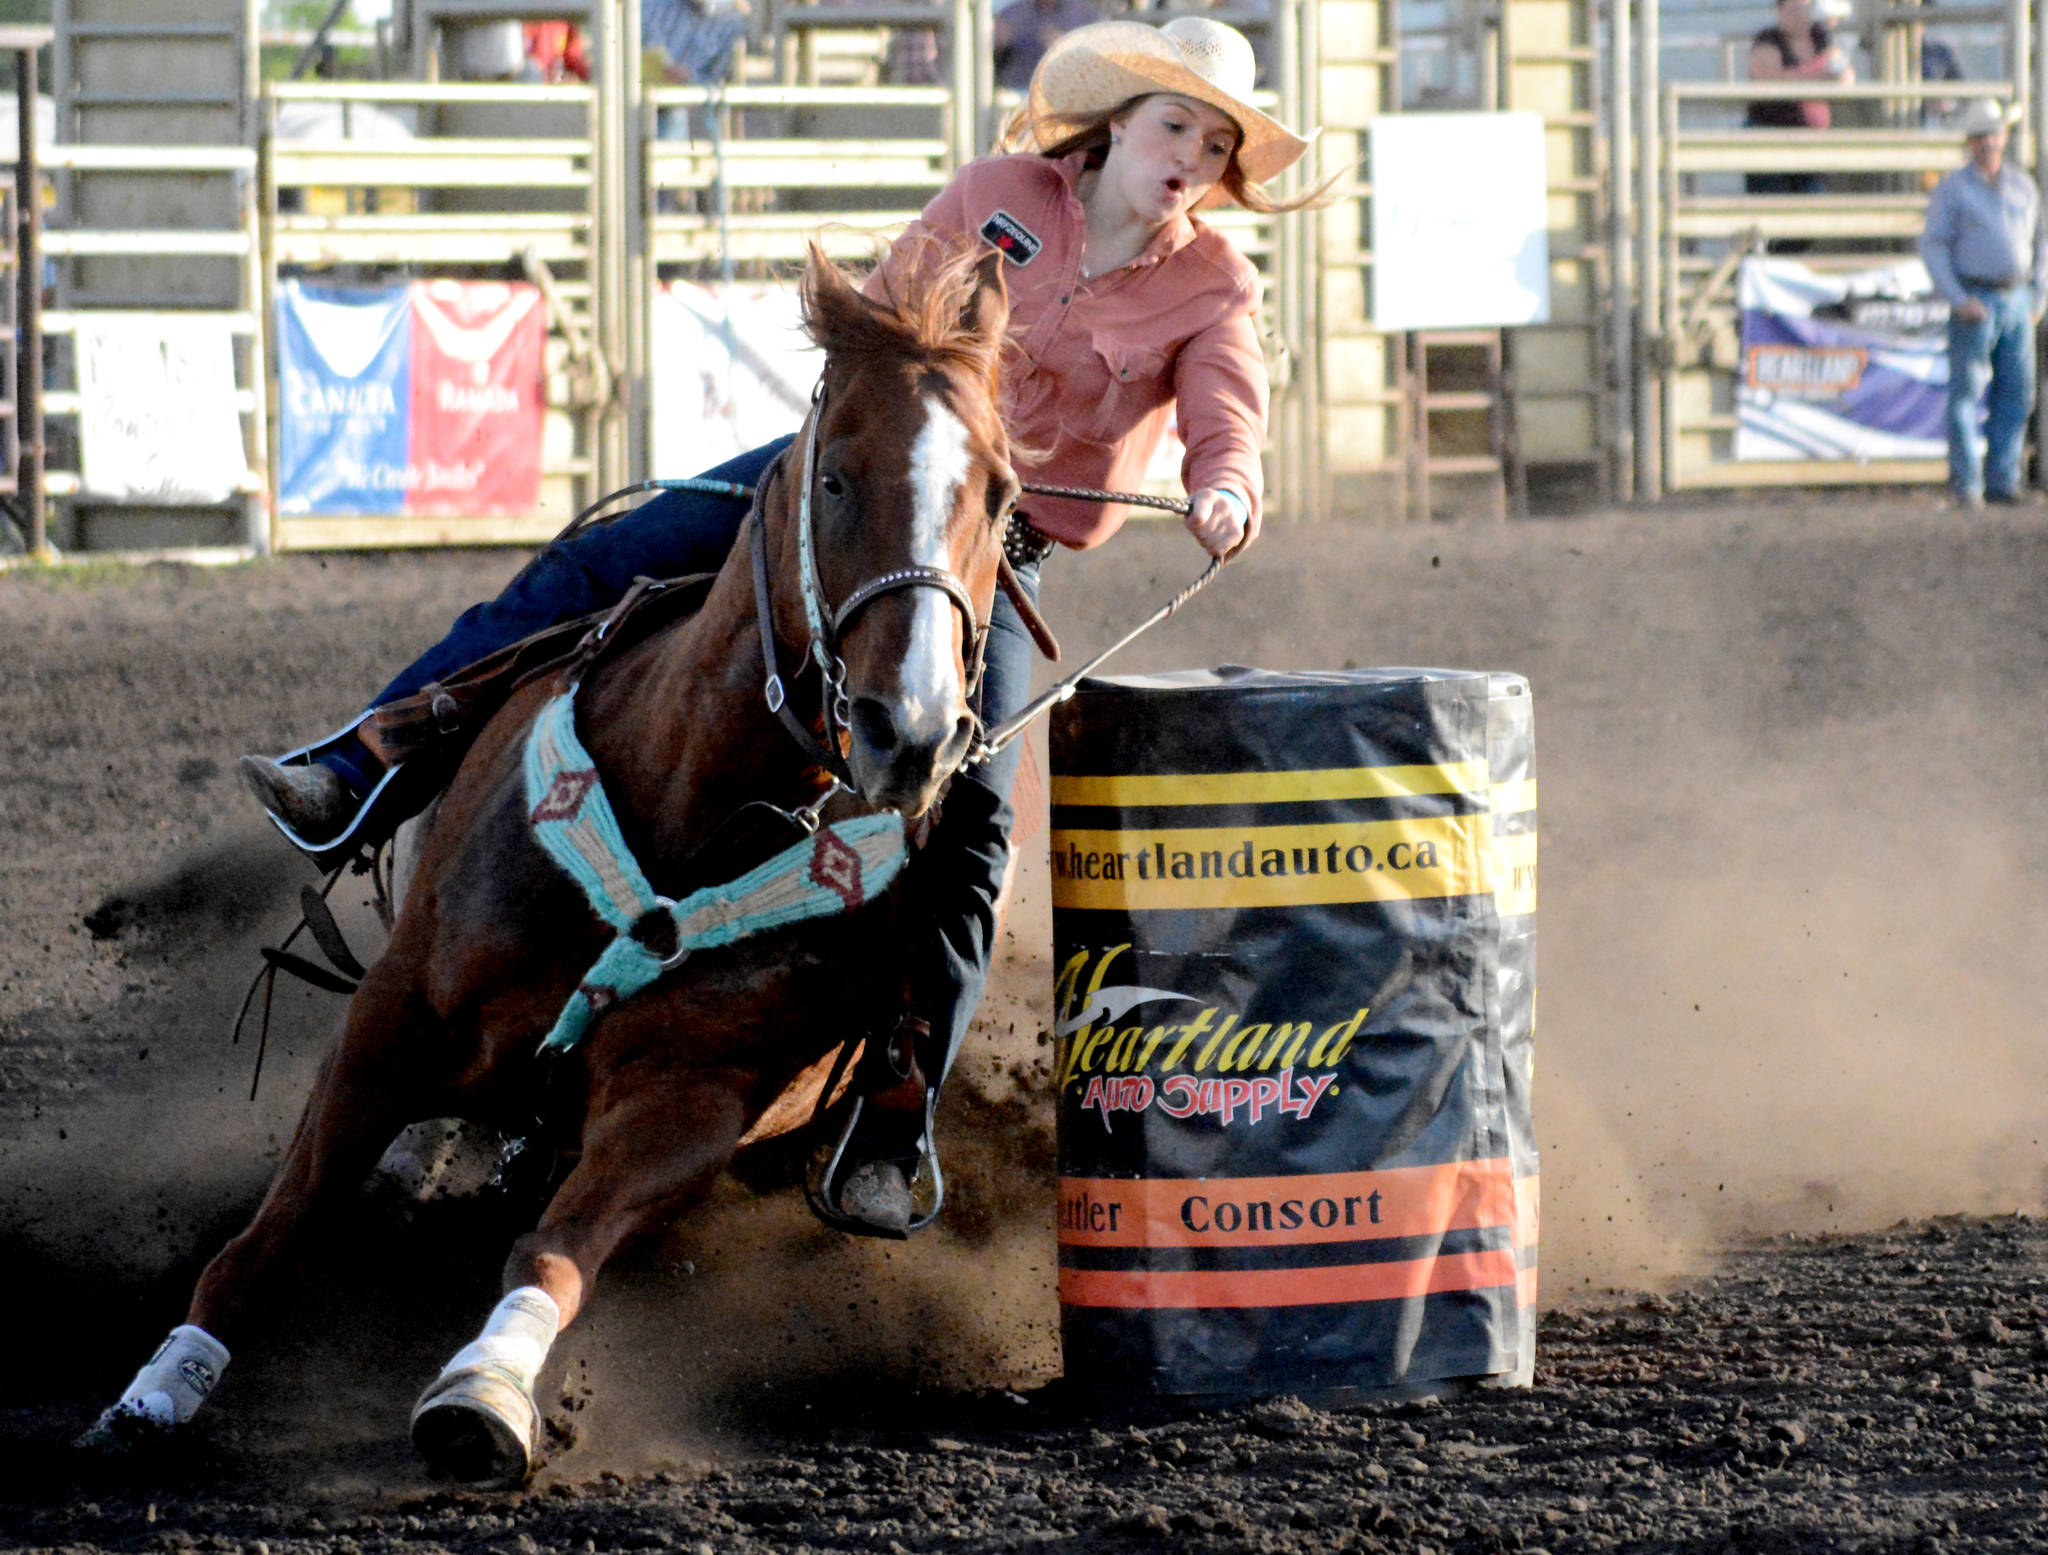 Sydney Windack of Maple Creek, SK, gets 18.73 in the Ladies Barrel Racing event during a rodeo event at Stettler’s Steel Wheel Stampede June 8. (Lisa Joy/Stettler Independent)